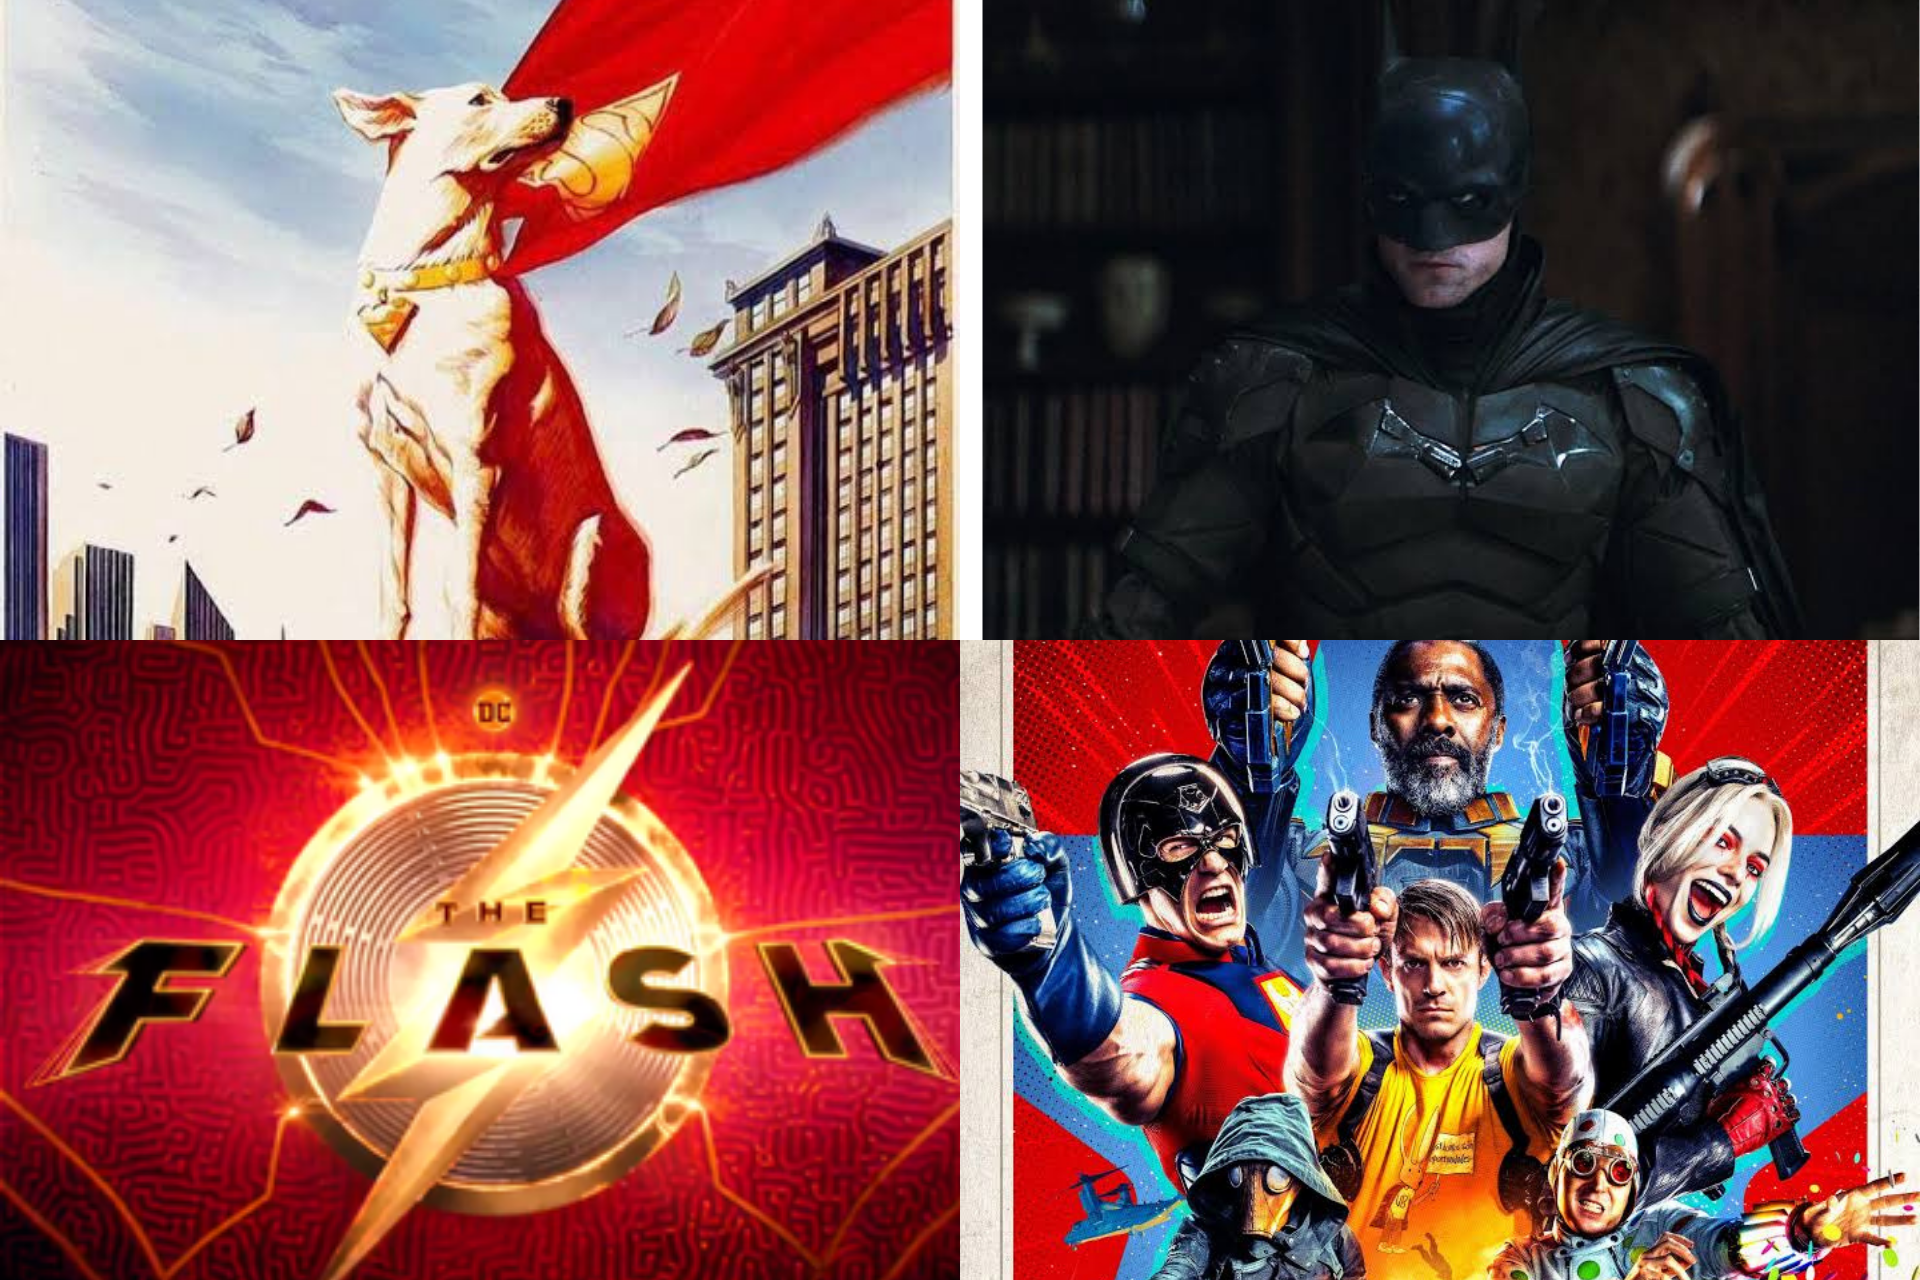 See all 7 confirmed DC films and series for 2021 and 2022